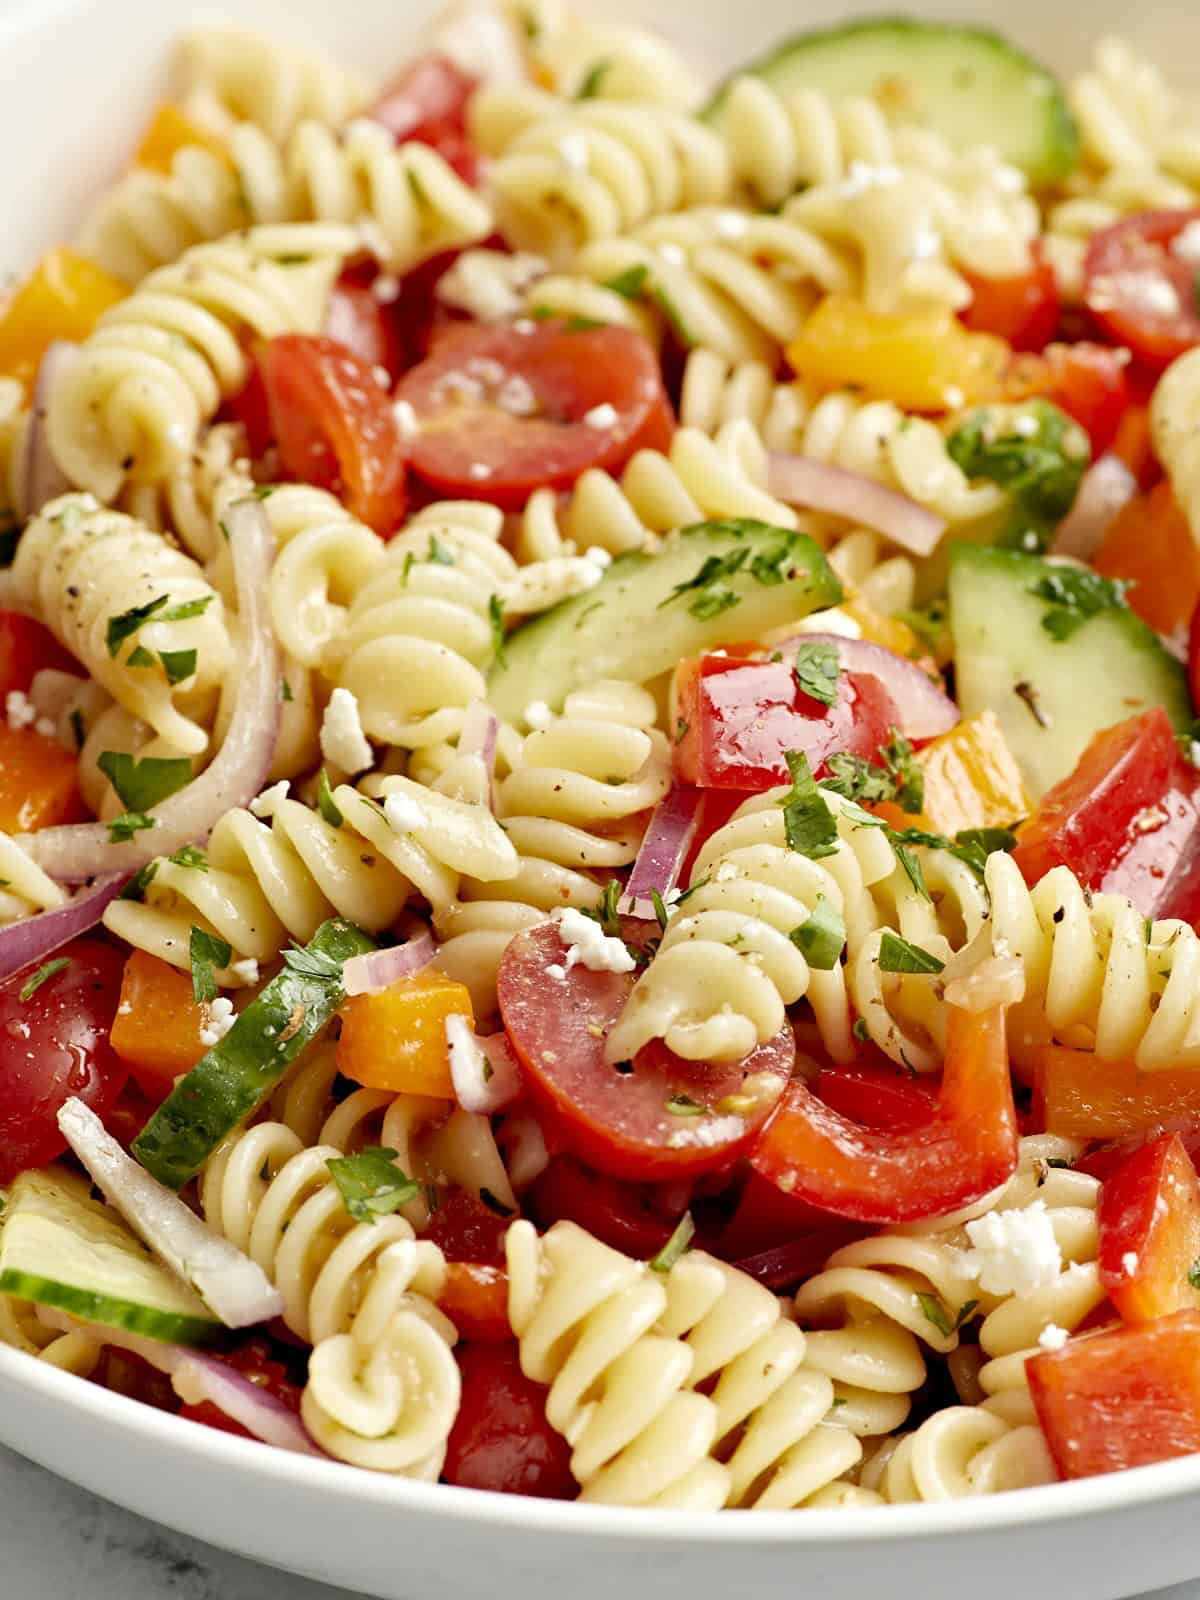 Close up view of pasta salad in a white serving bowl.